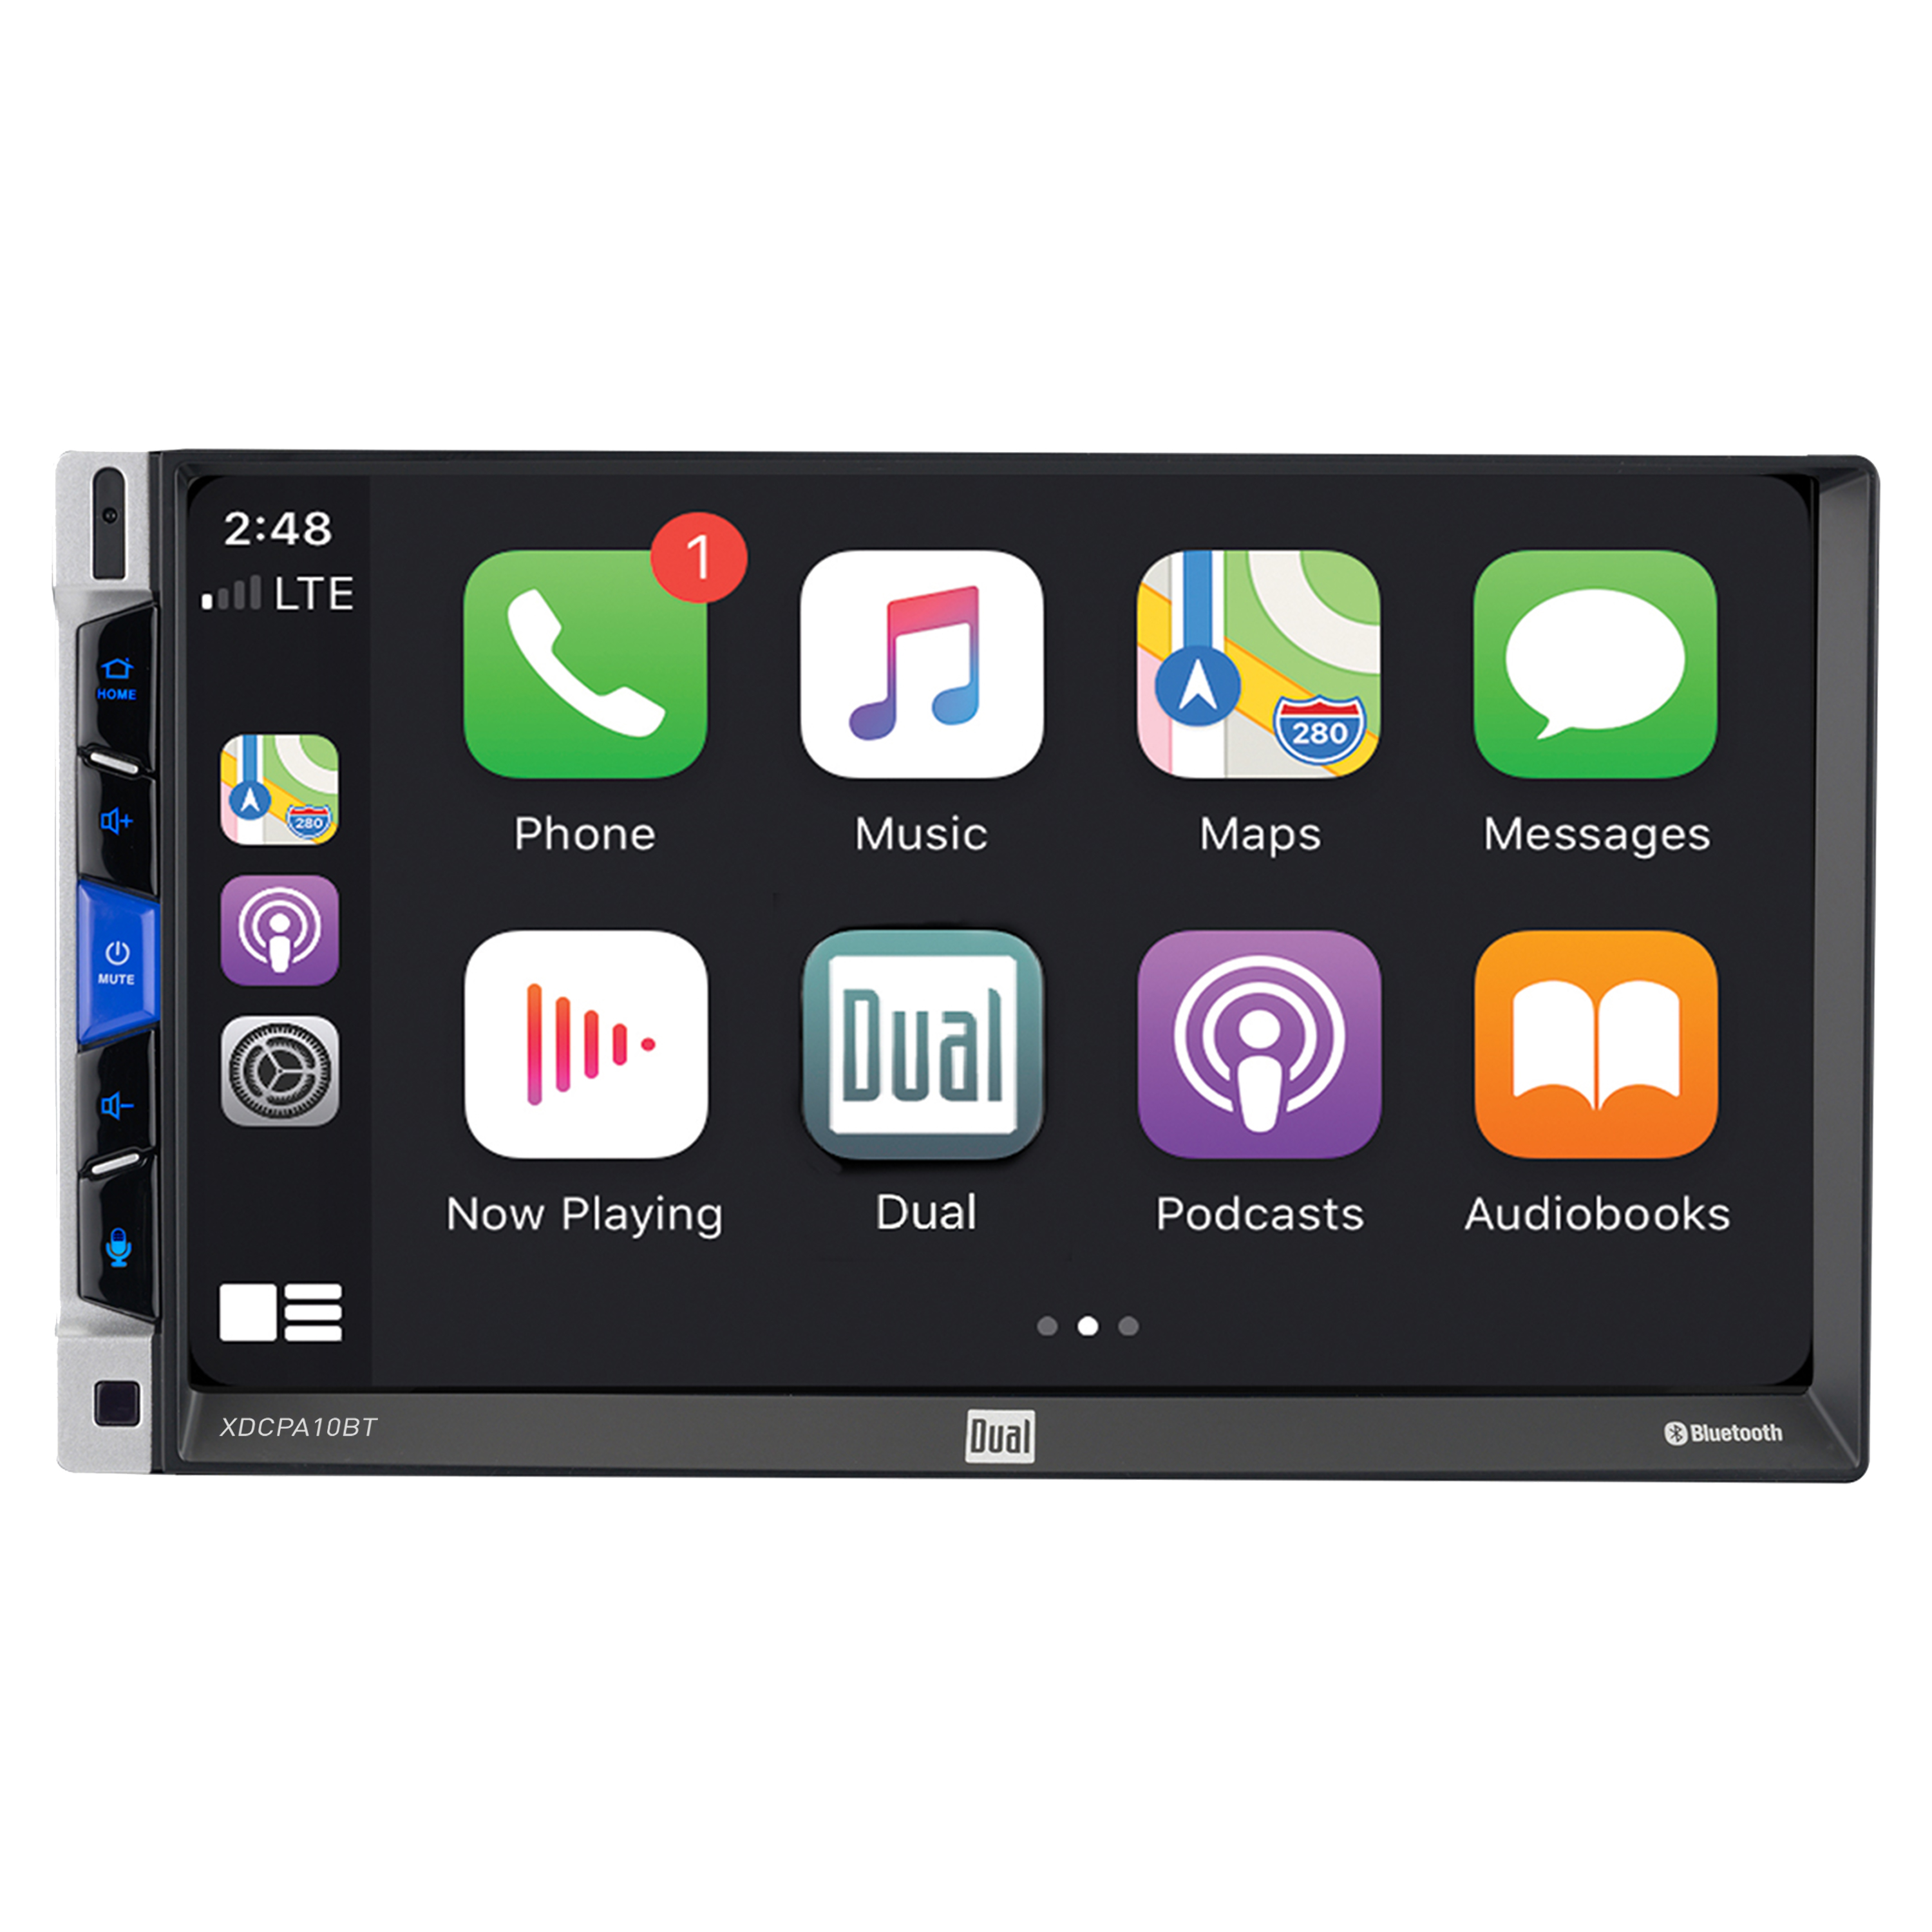 Dual Electronics XDCPA10BT 7 inch LED Multimedia Touch Screen Double DIN Car Stereo | Apple CarPlay Android Auto $104.98